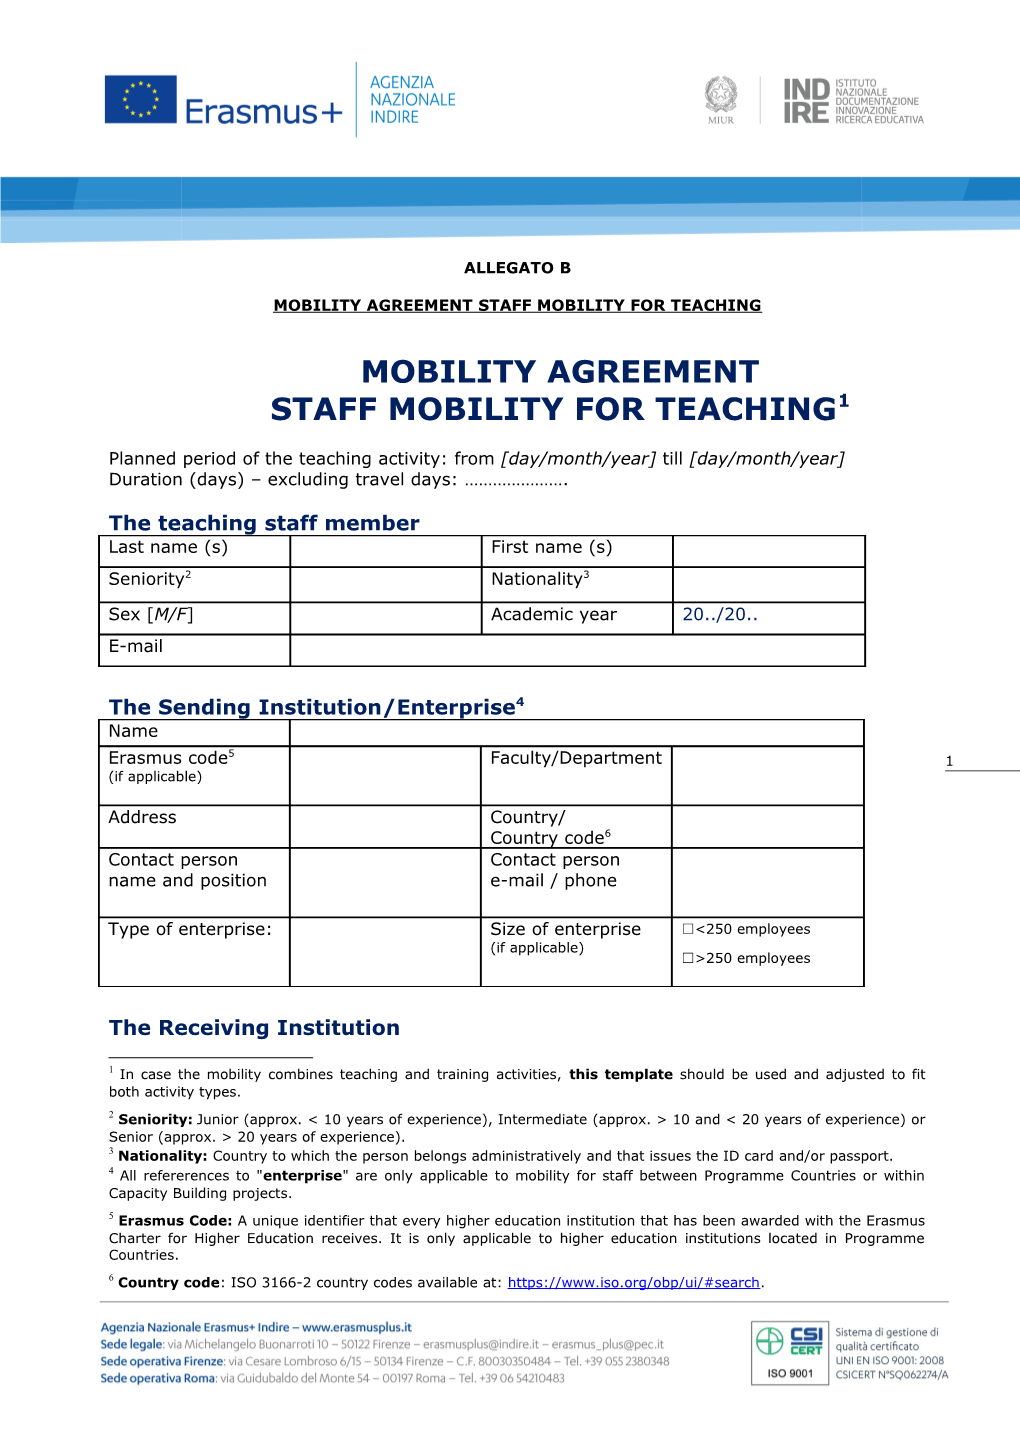 Mobility Agreement Staff Mobility for Teaching